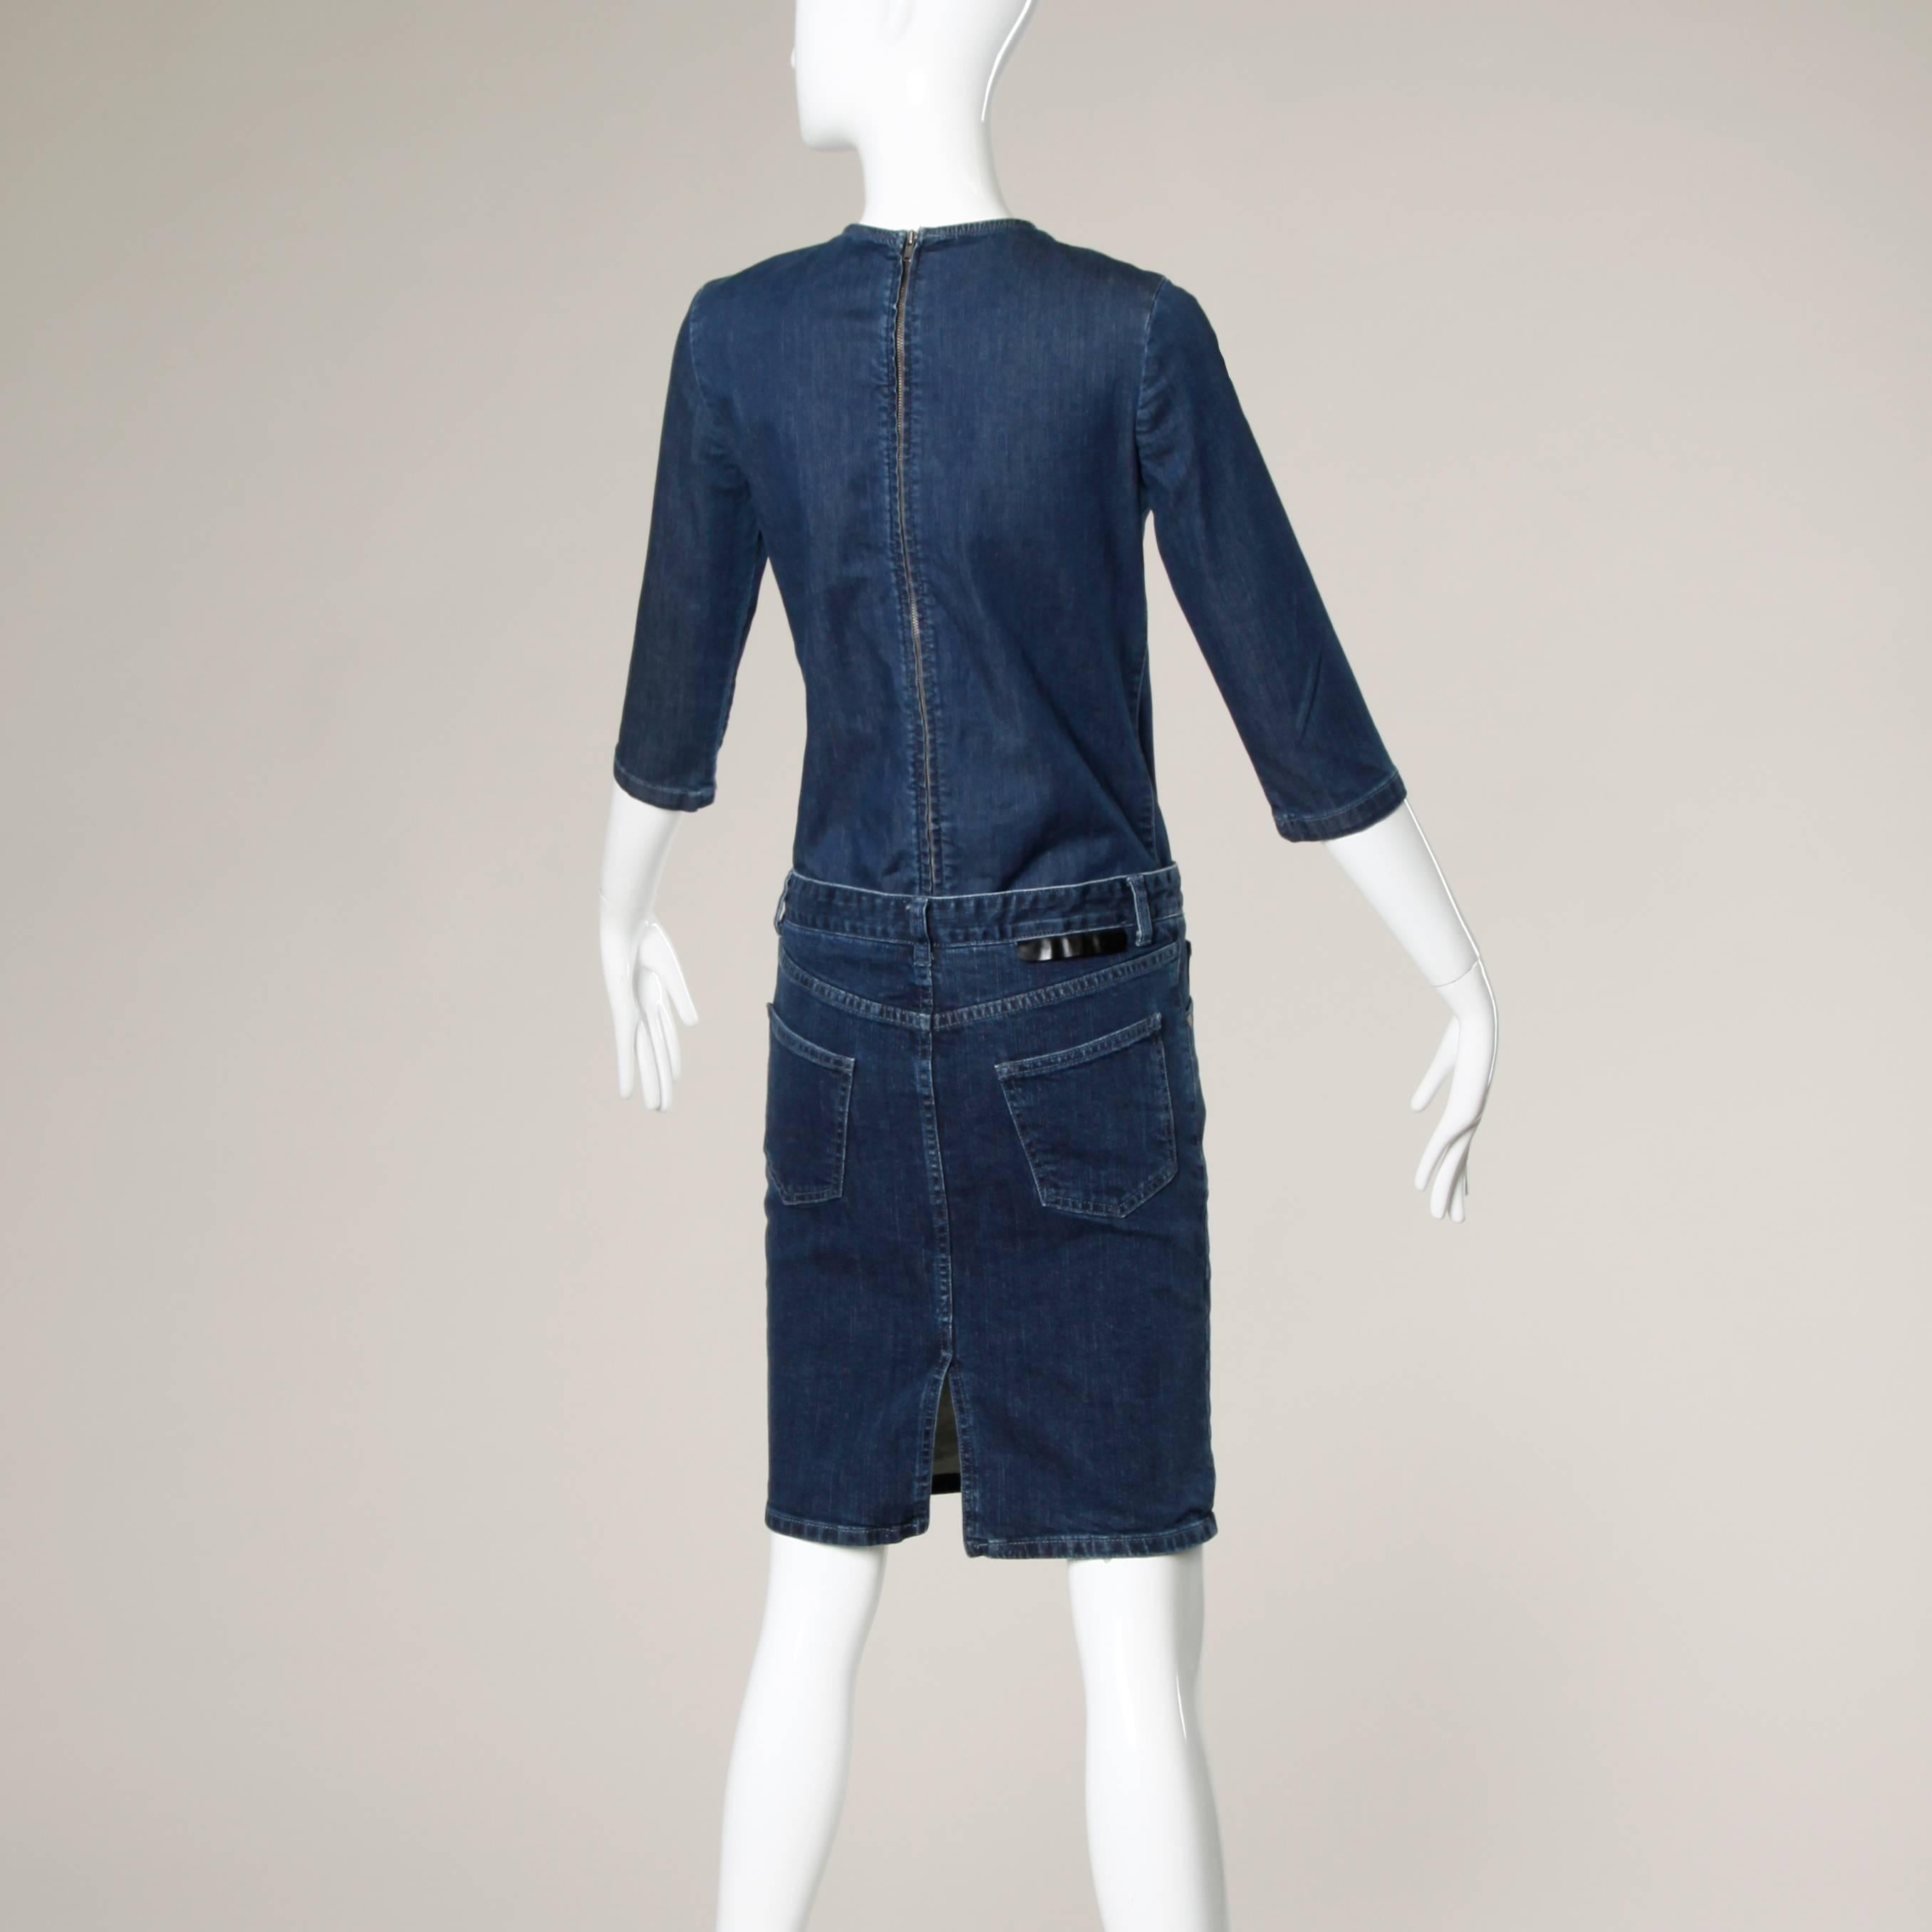 Slightly stretchy Stella McCartney denim dress cut to look like a matching skirt and top. This is actually one piece.

Details:

Unlined
Front and Back Pockets
Back Metal Zip Closure 
Marked Size: 36
Estimated Size: Small
Color: